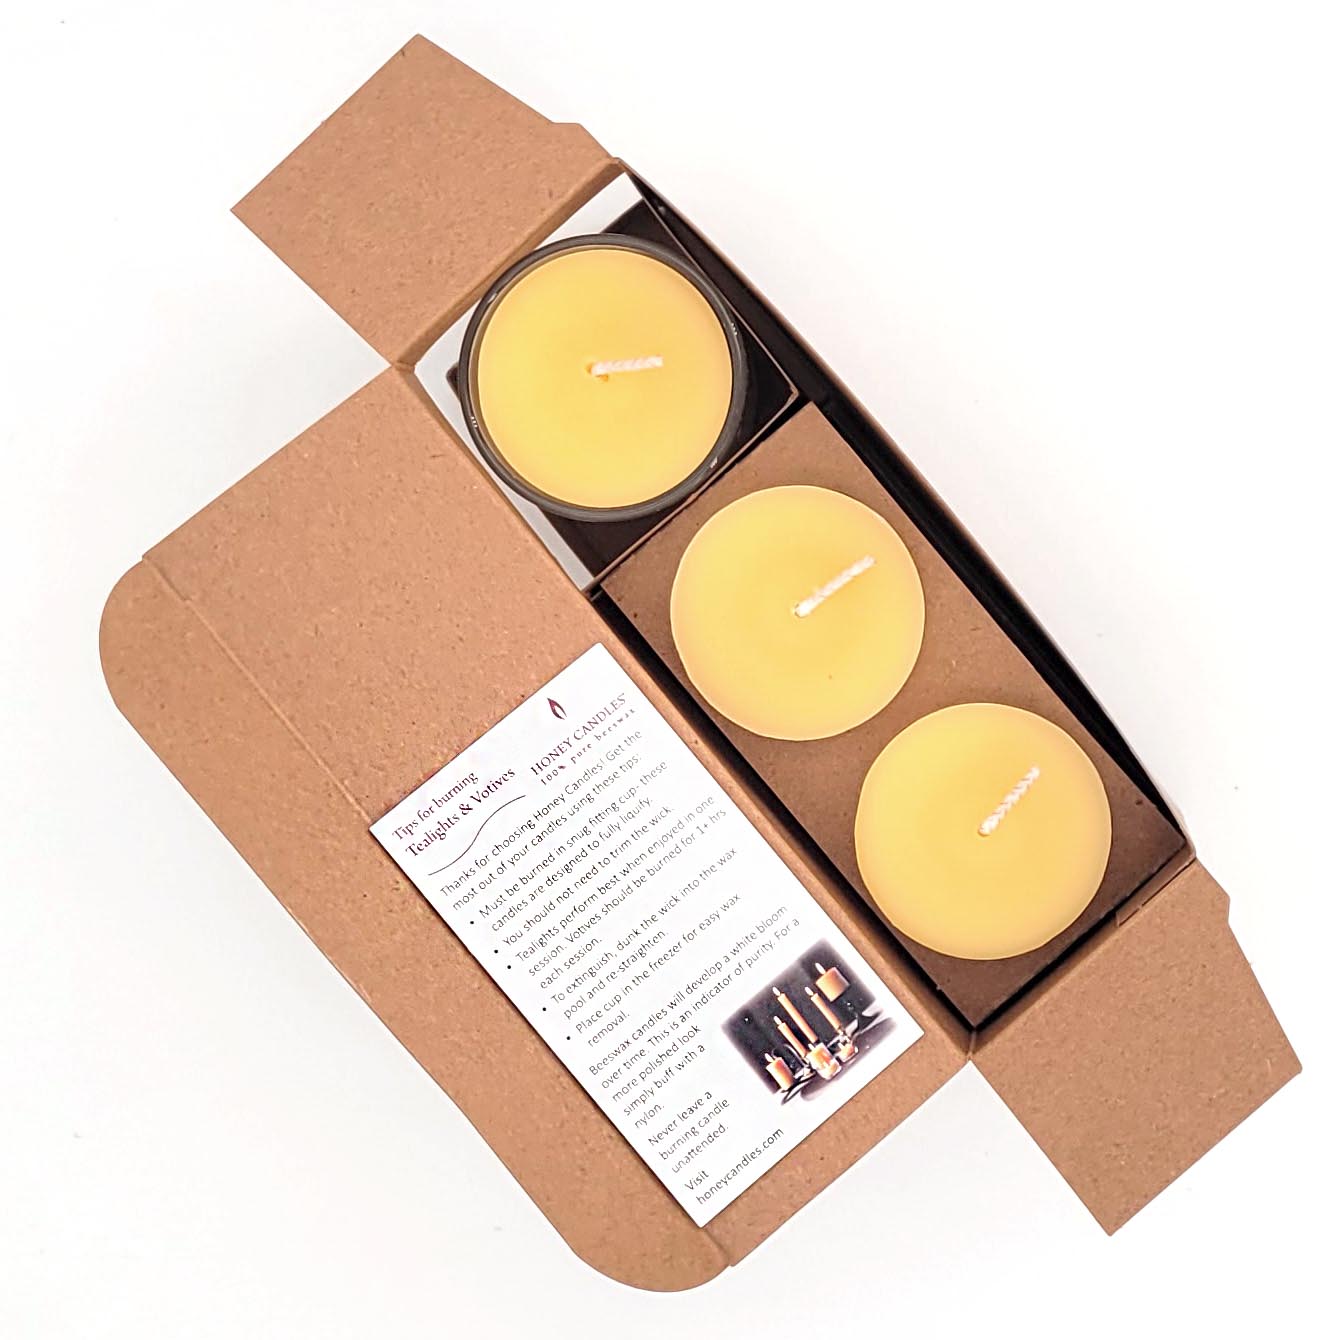 3 kootenay forest scented beeswax votives